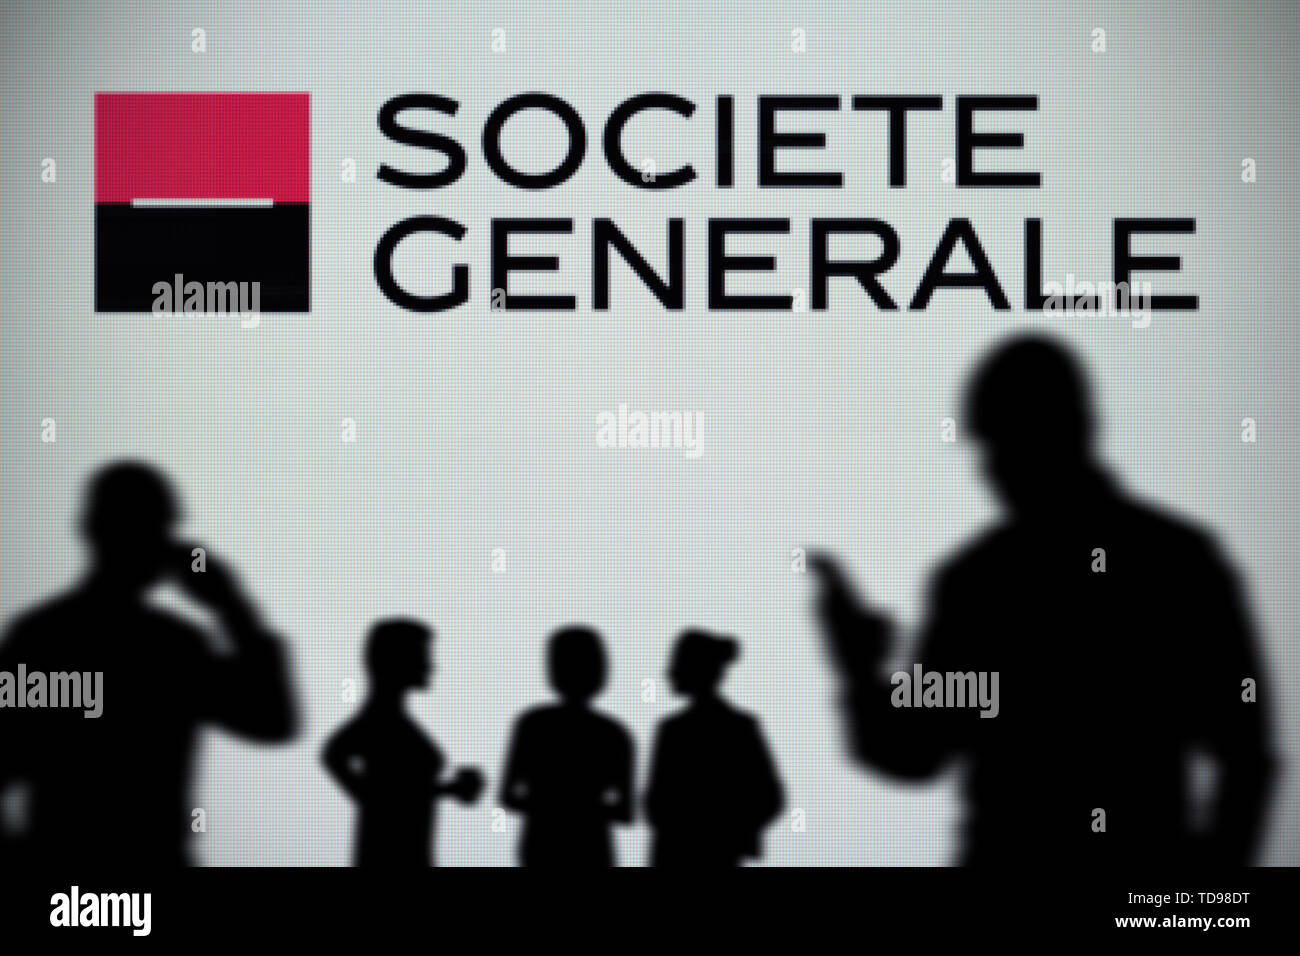 The Societe Generale logo is seen on an LED screen in the background while a silhouetted person uses a smartphone (Editorial use only). Stock Photo